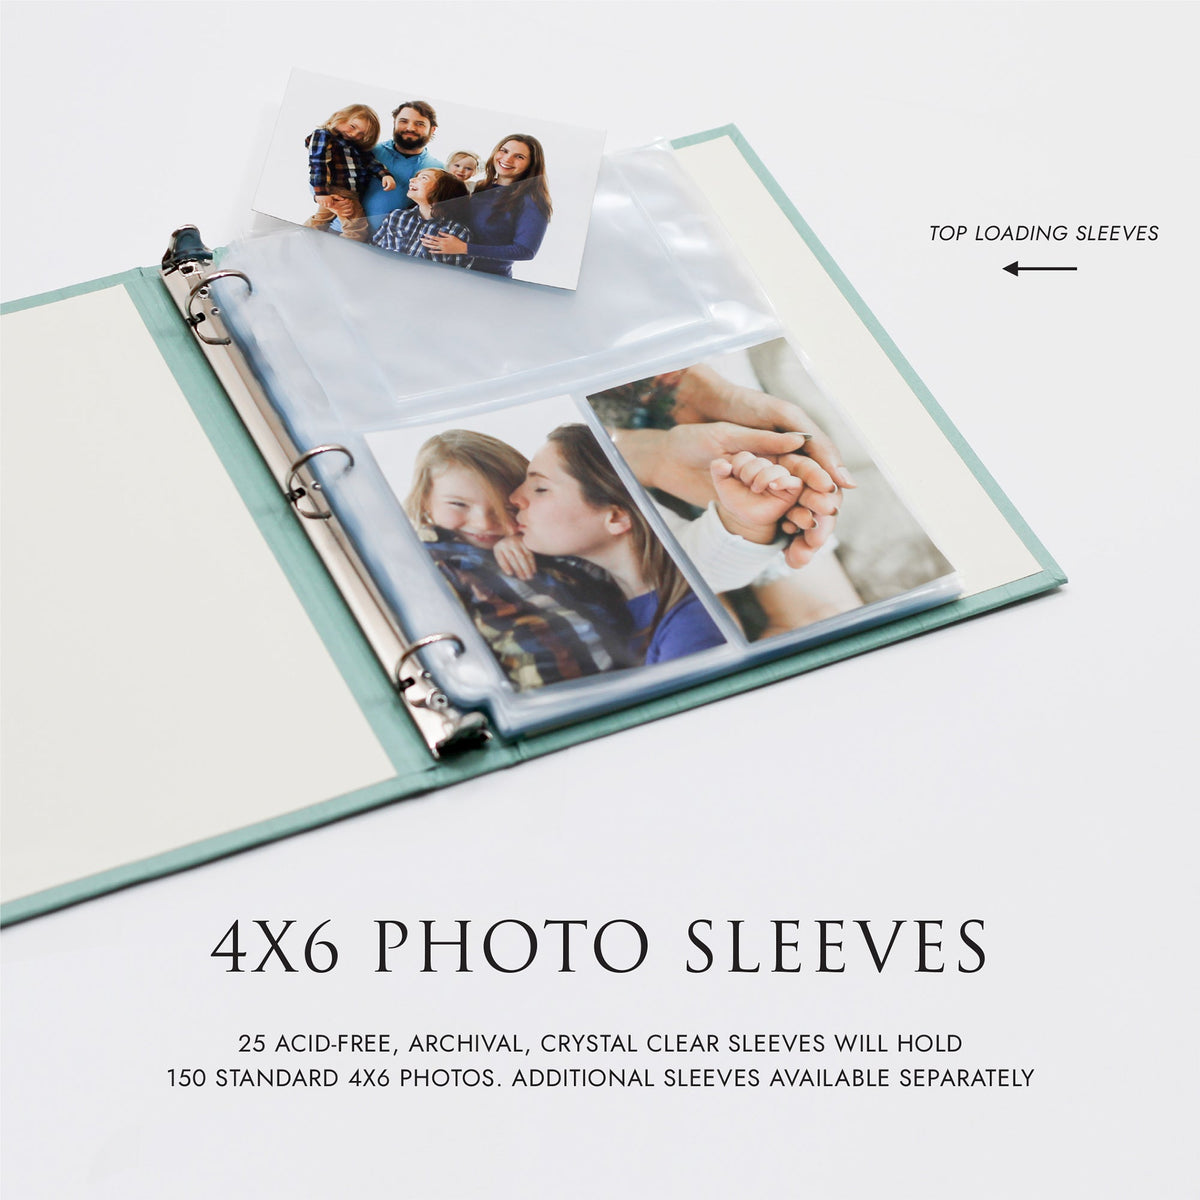 Large Photo Binder For 4x6 Photos | Cover: Creme Vegan Leather | Available Personalized